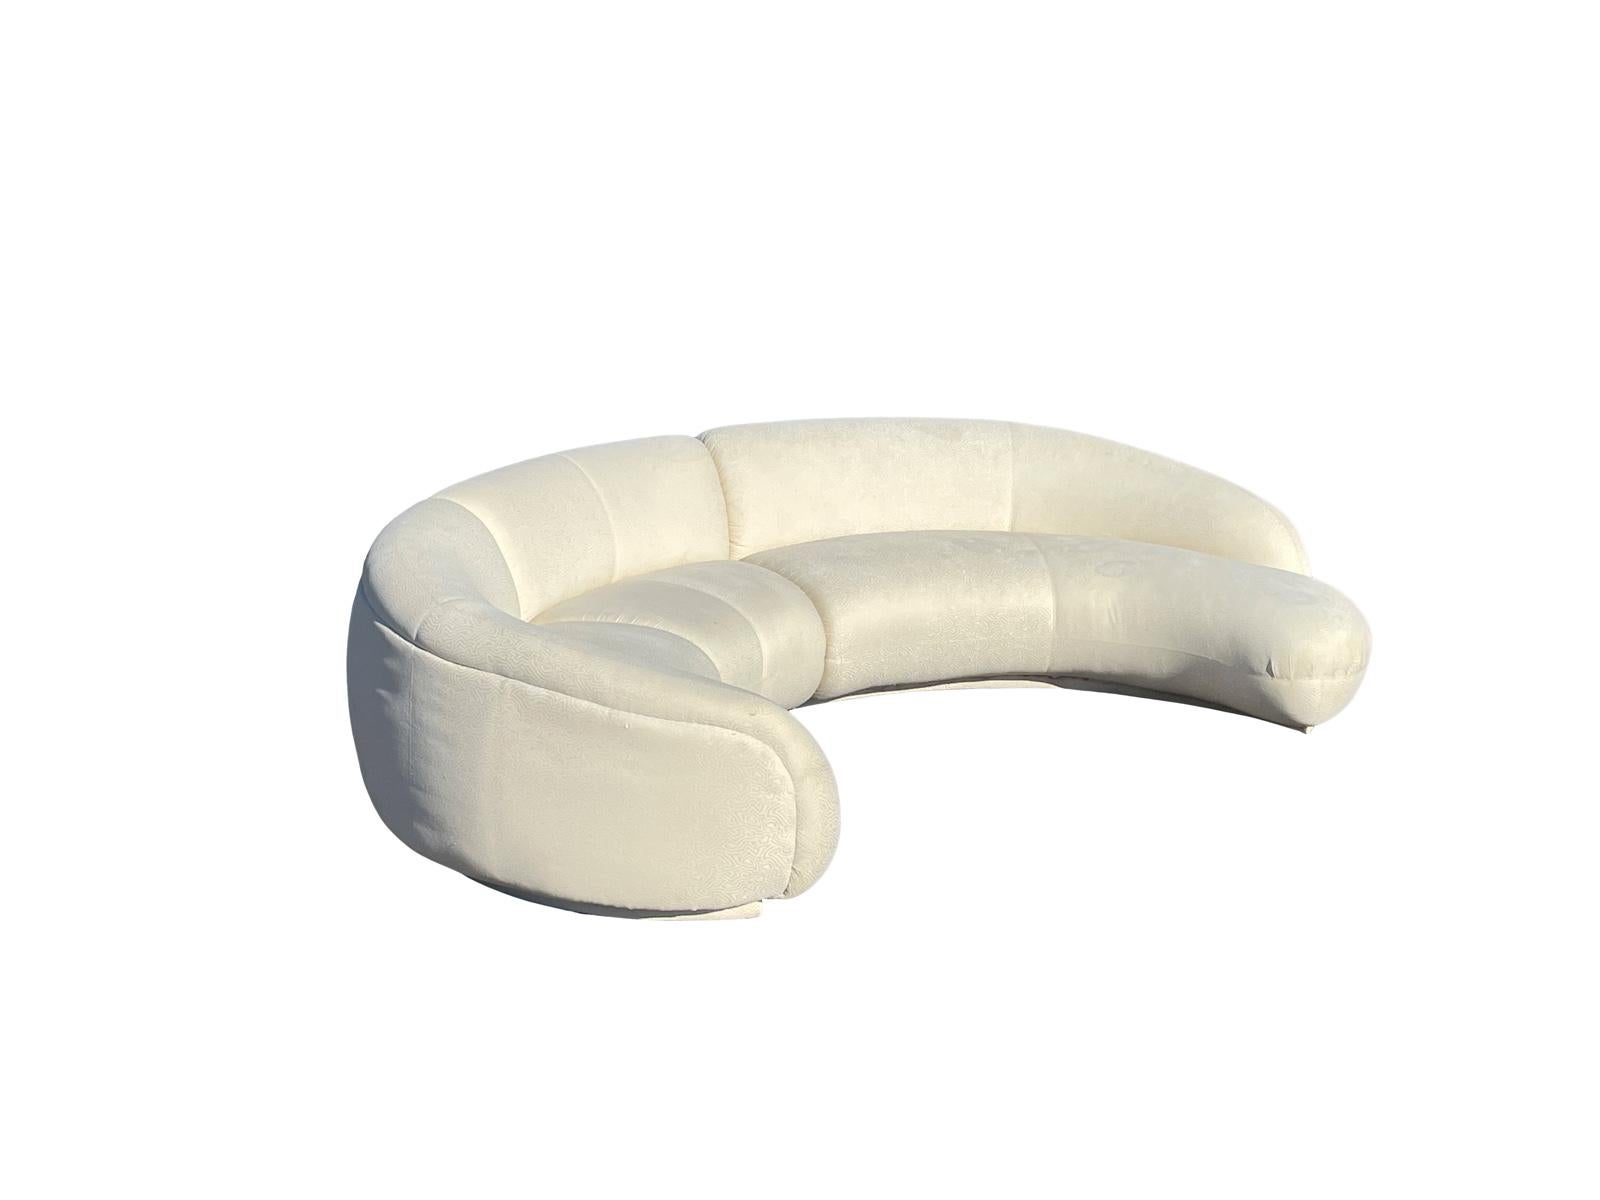 American 1980s 3-Piece Biomorphic Curved Sofa By Preview  For Sale